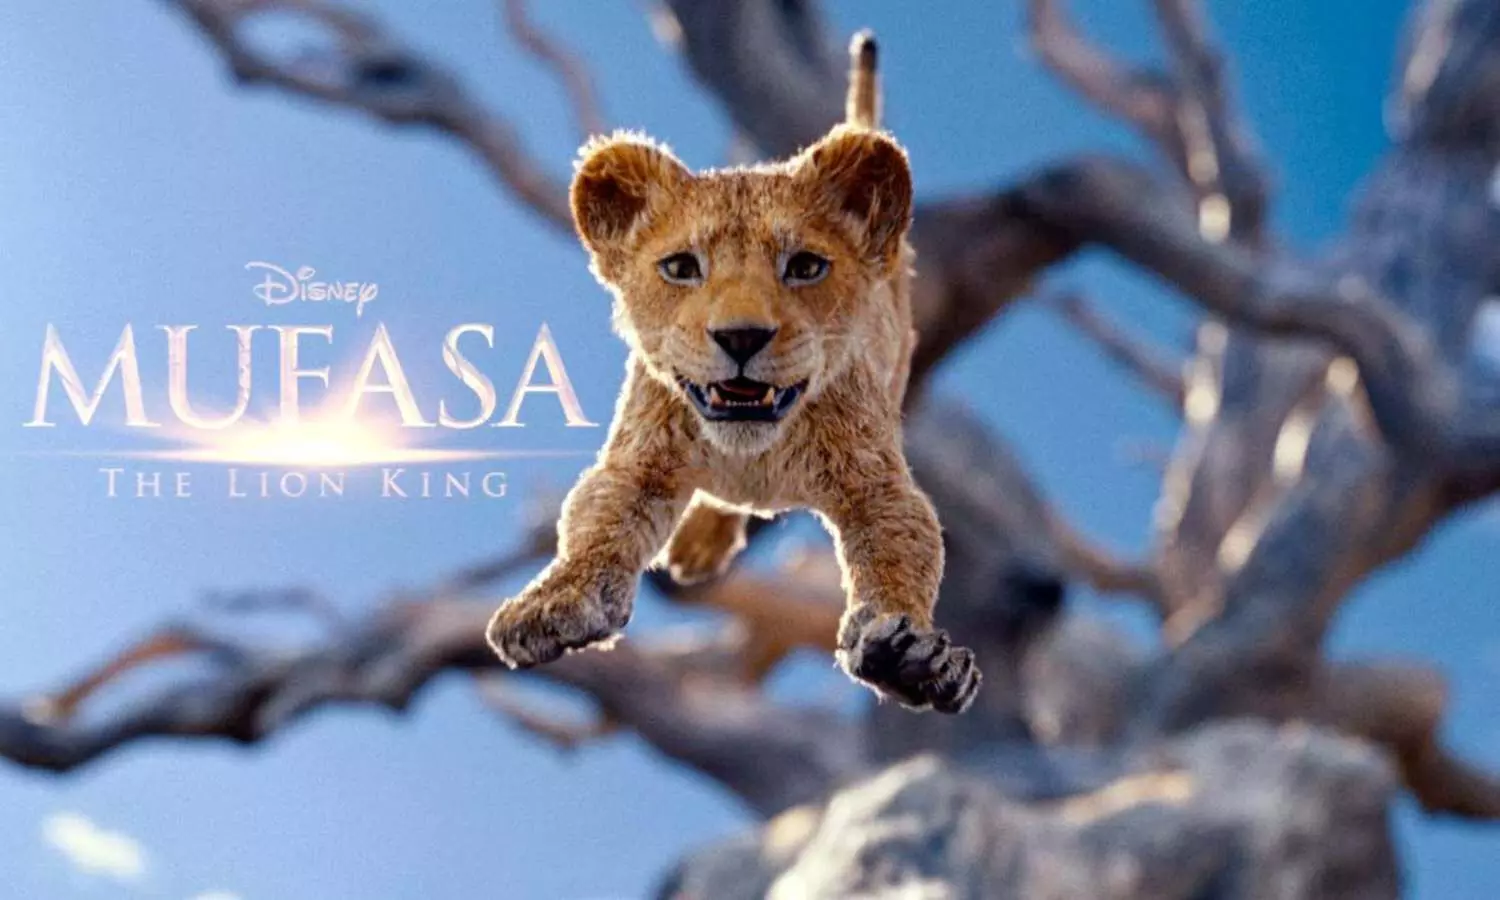 Mufasa: The Lion King trailer takes you back to the pride lands